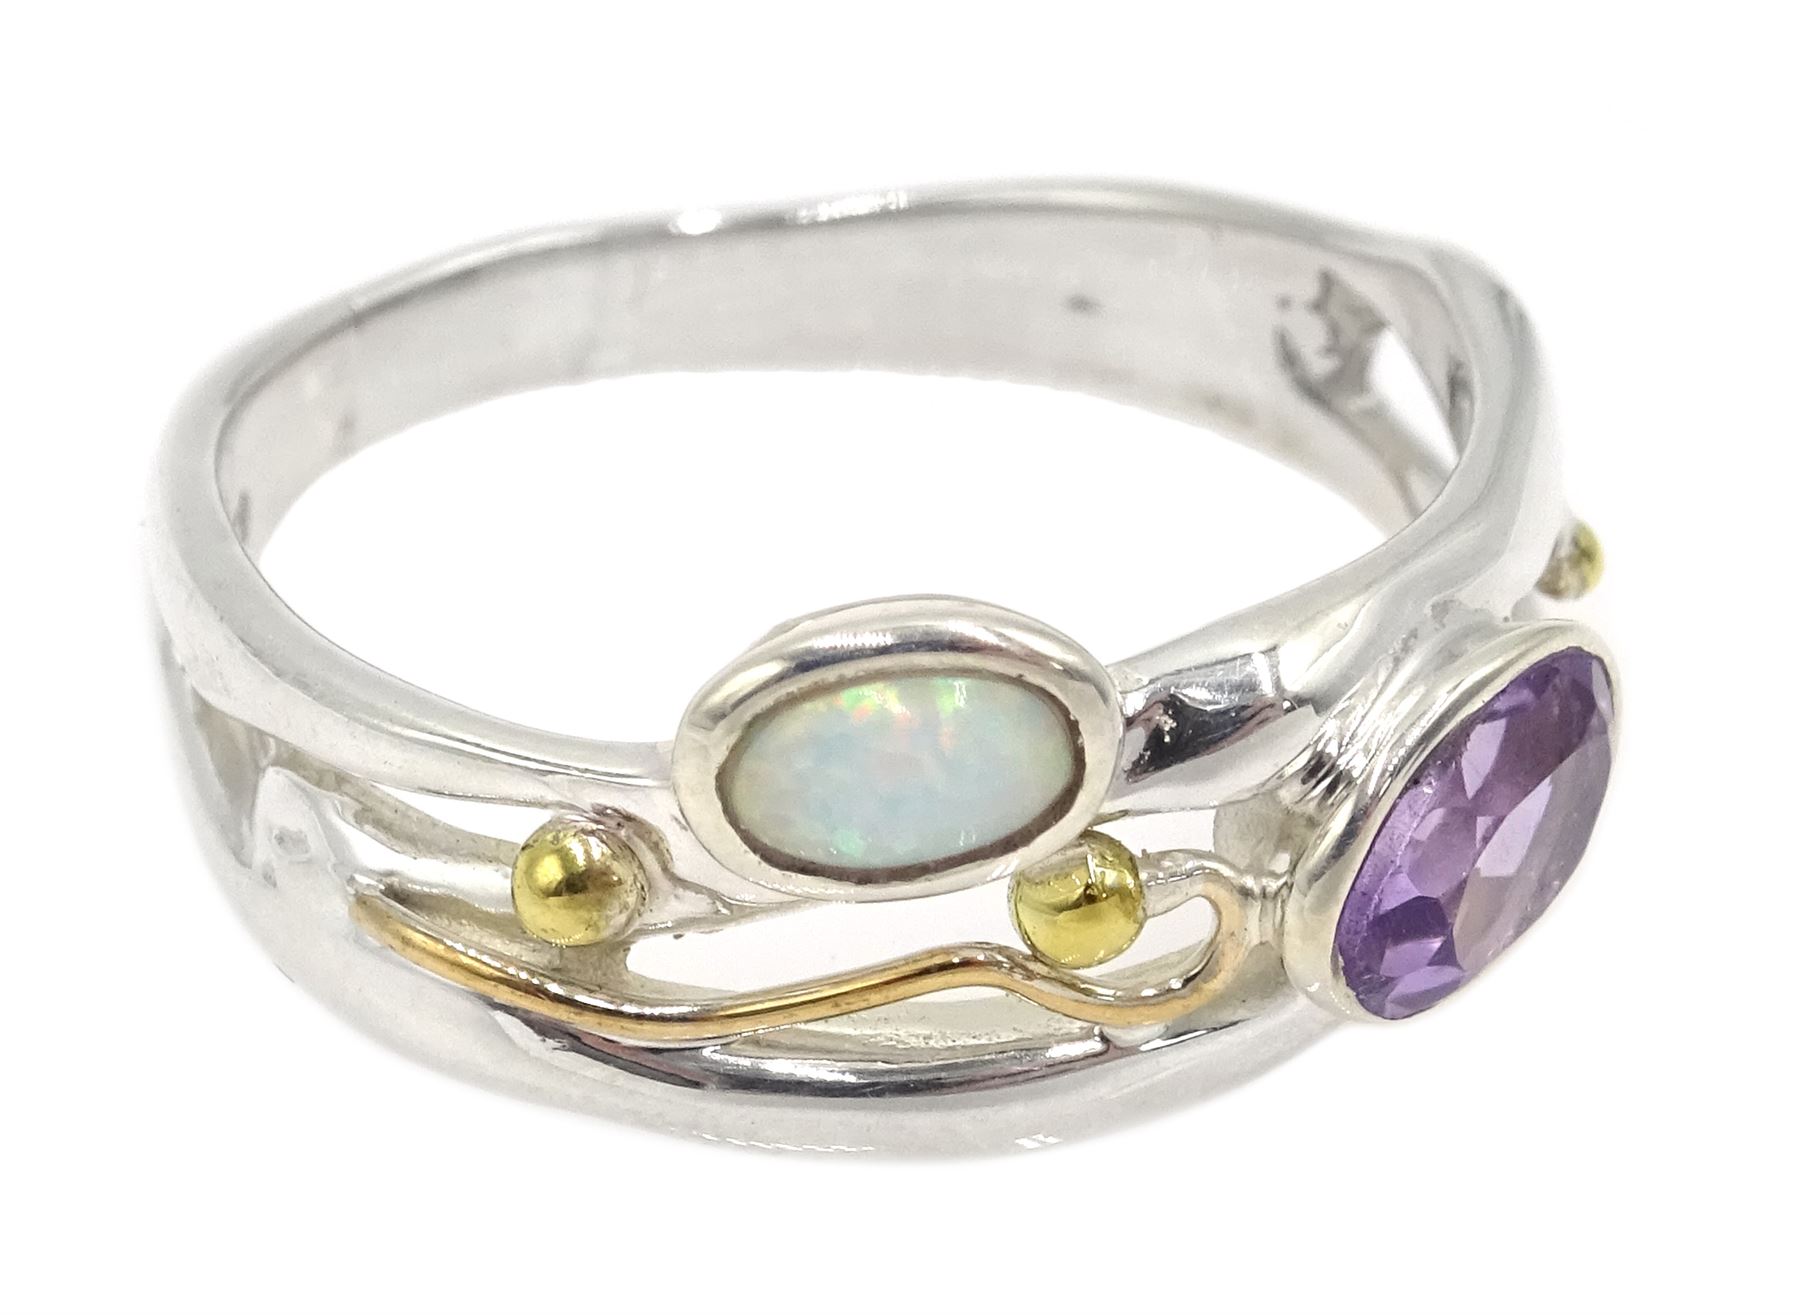 Silver and 14ct gold wire amethyst and opal ring - Image 6 of 7